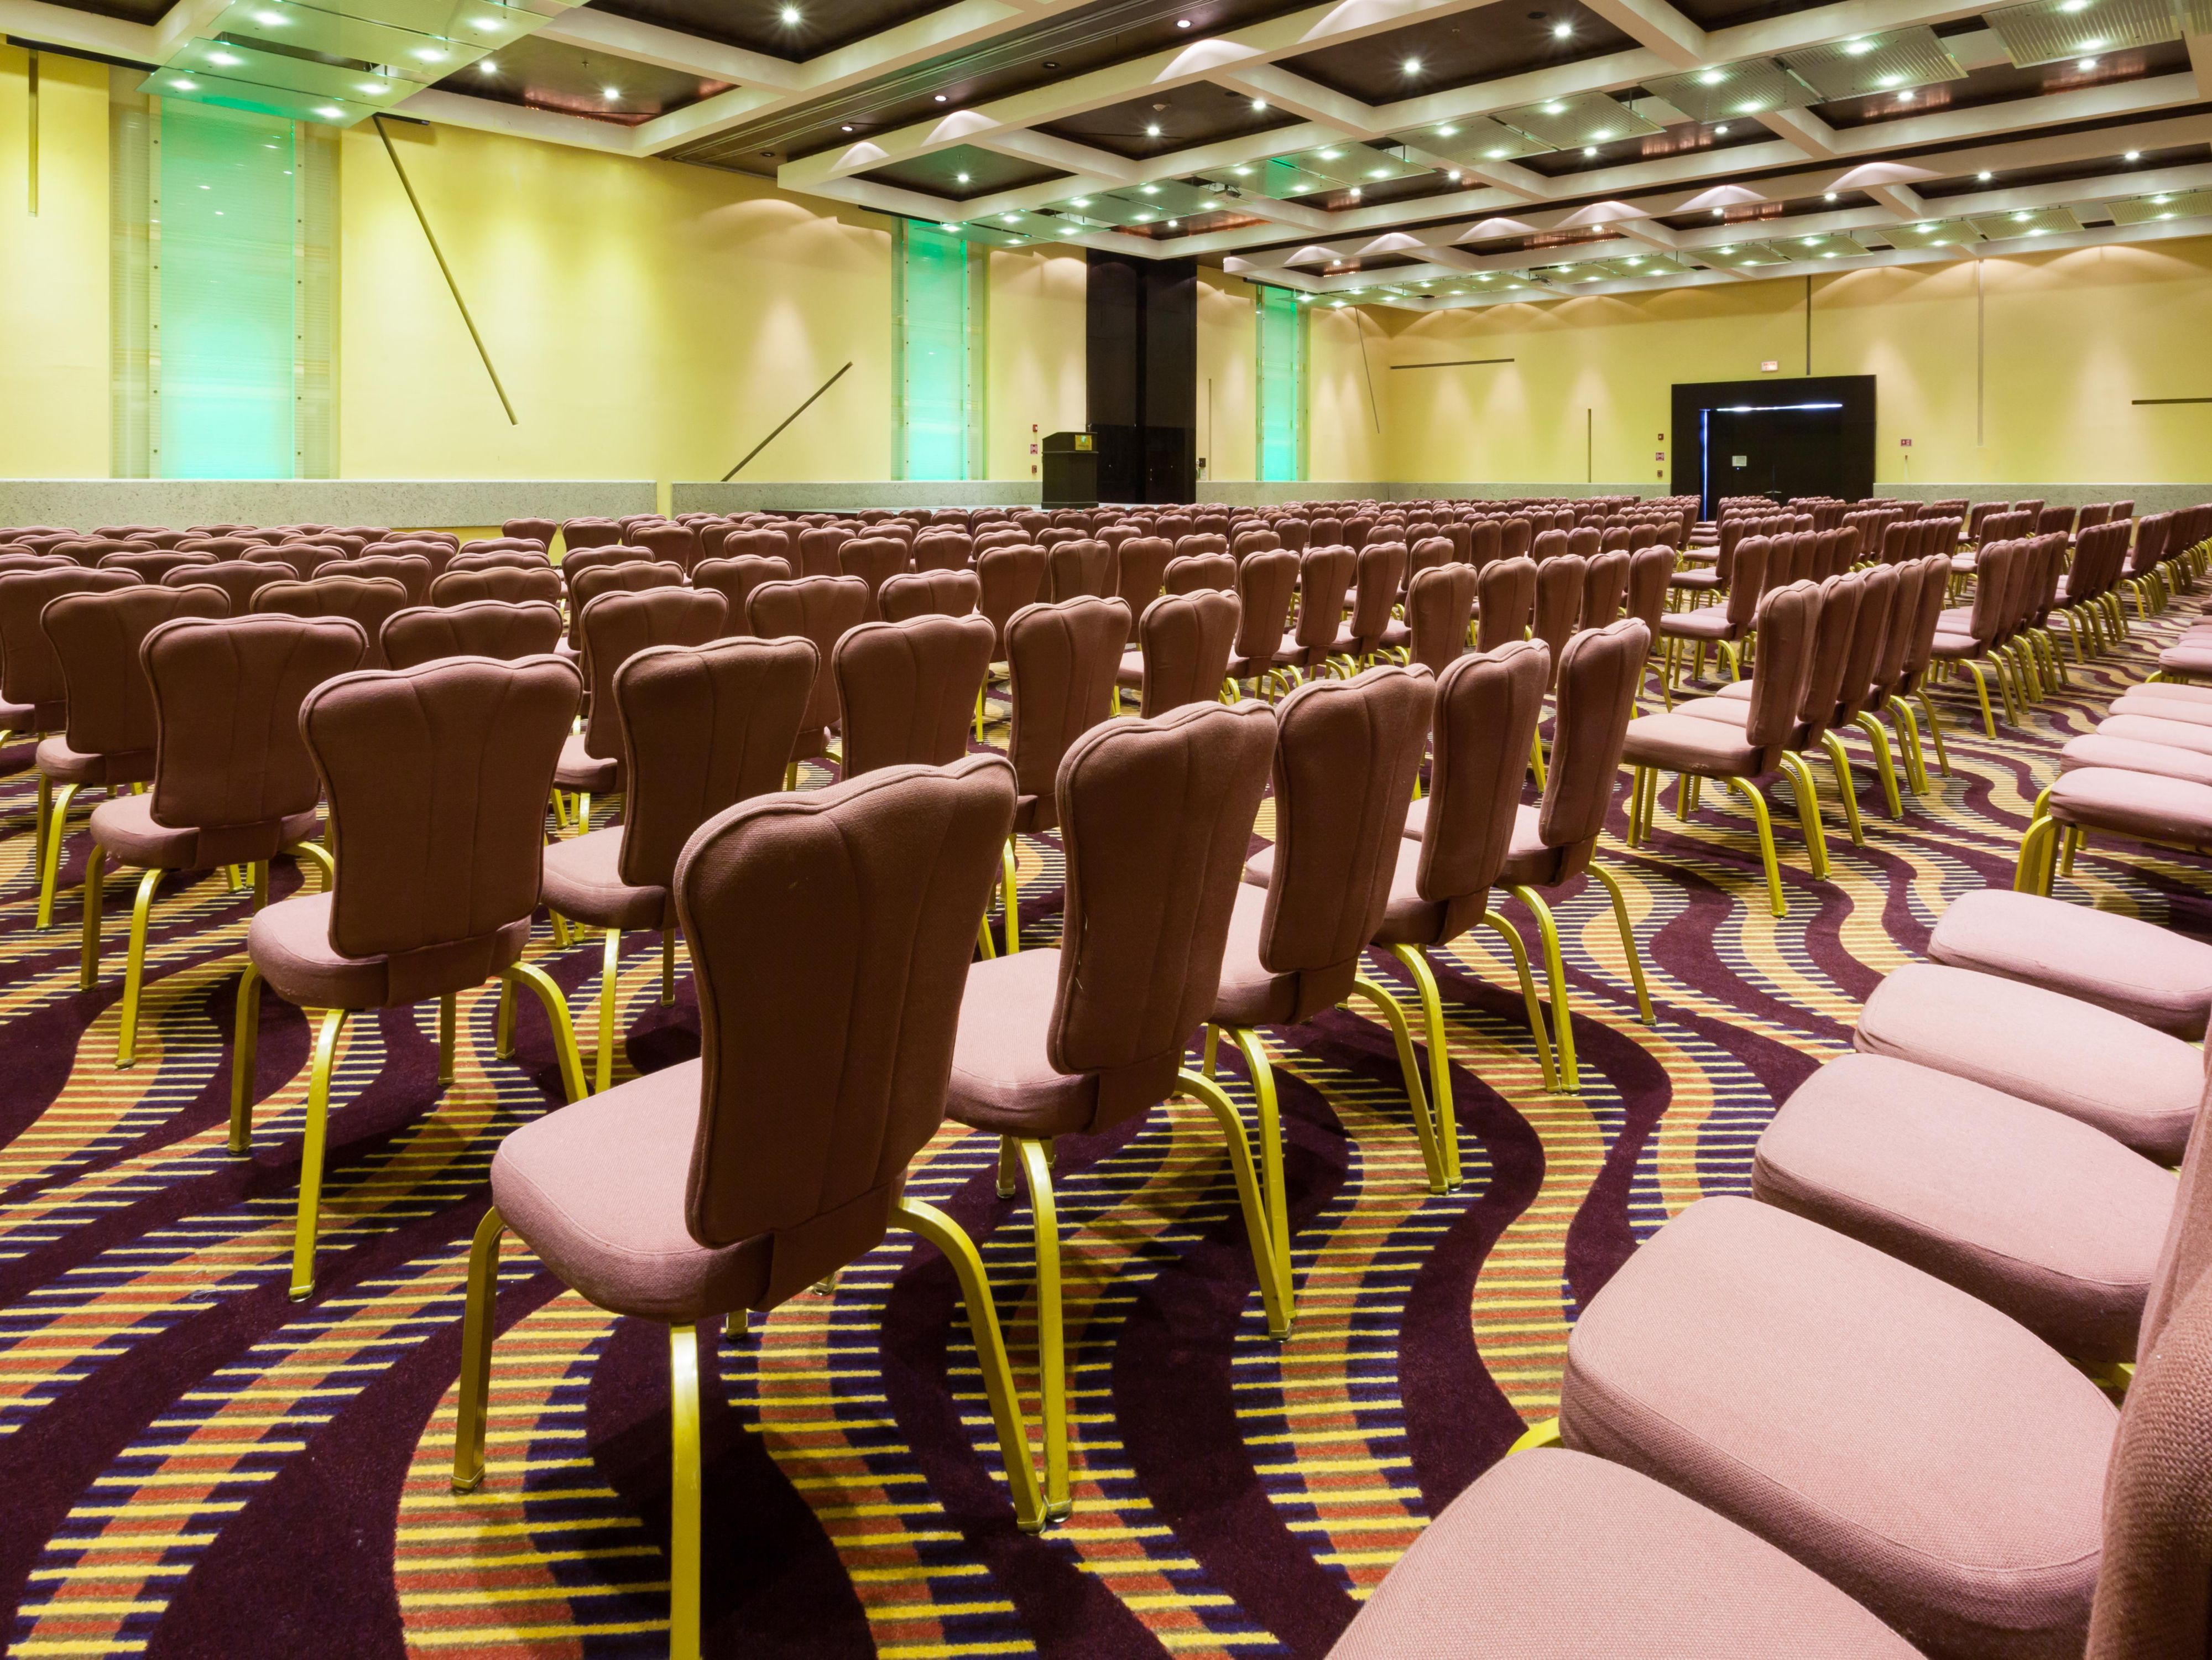 We have different rooms ideal for meetings, seminars, congresses and conventions